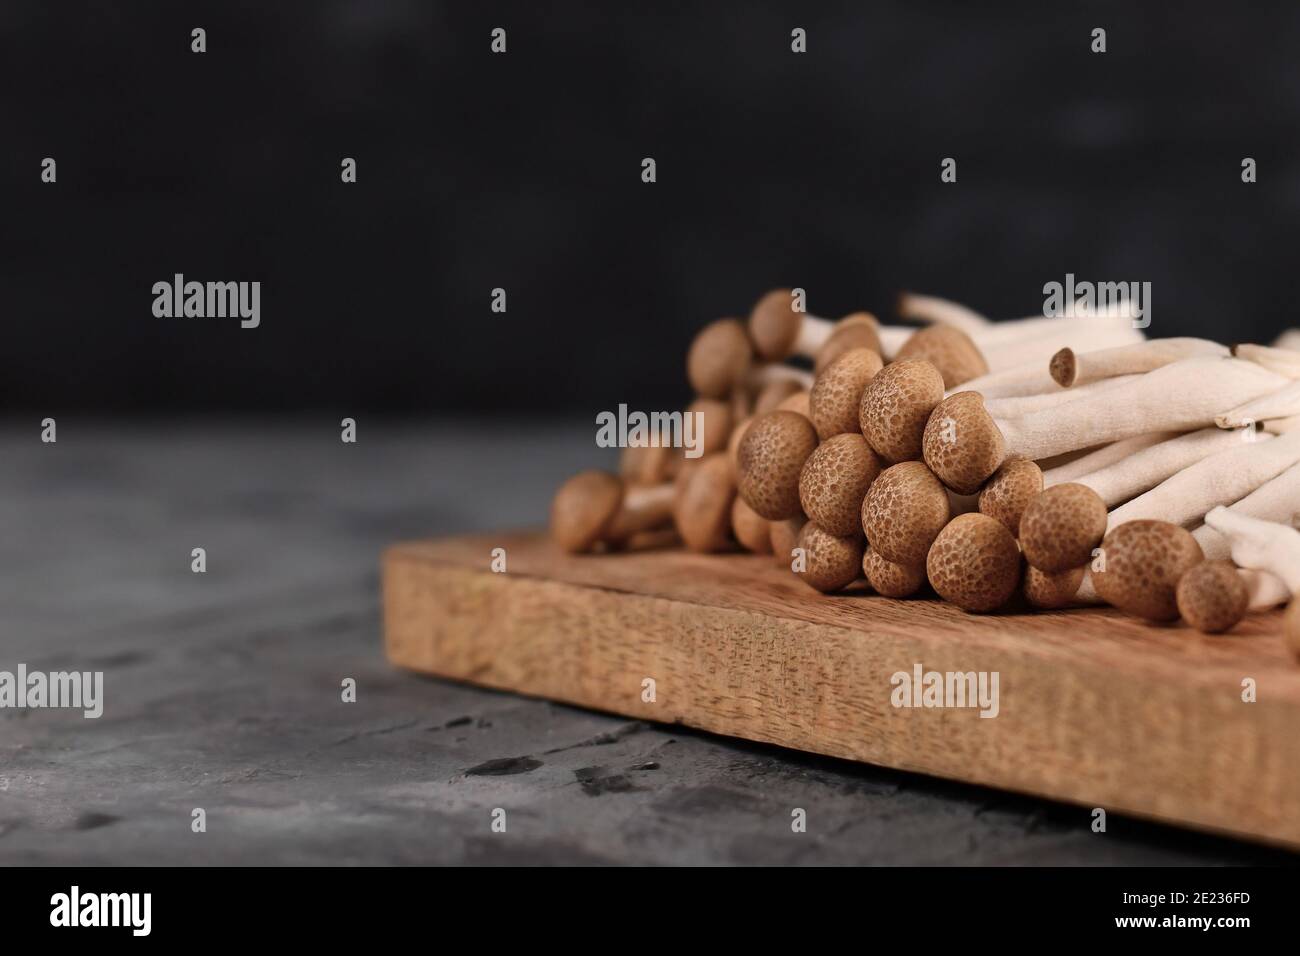 Group of brown edible mushrooms native to East Asia called 'Buna Shimeji' on wooden cutting board in front of dark background Stock Photo